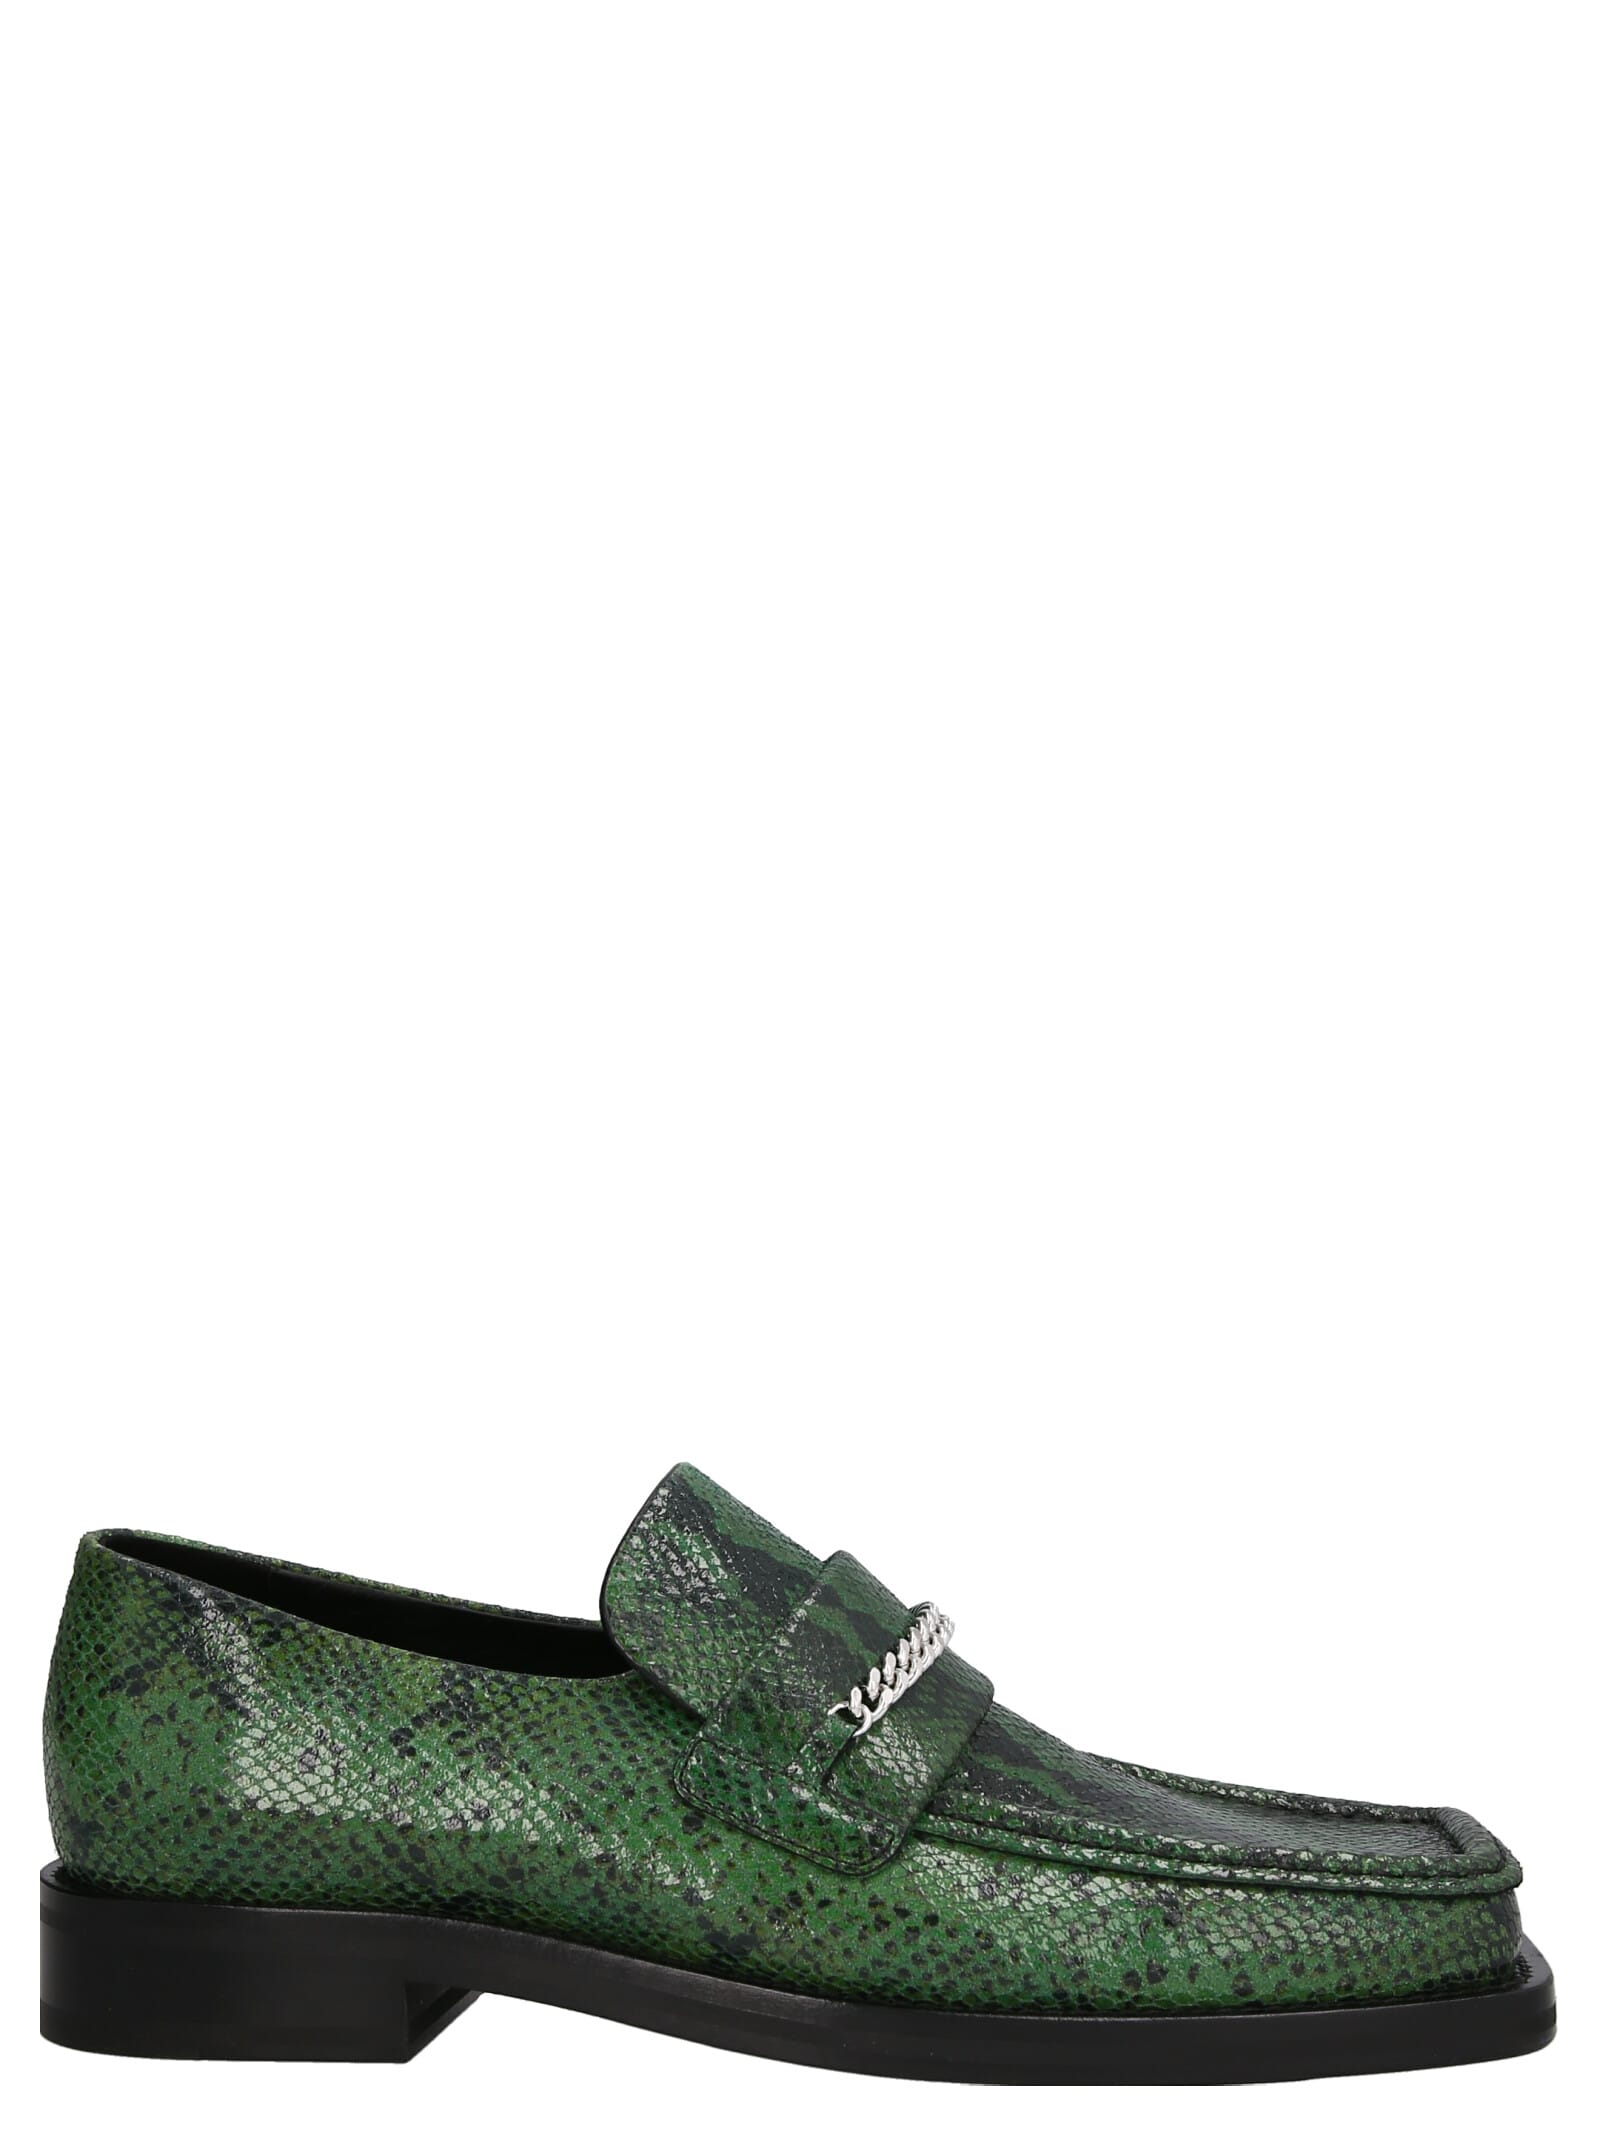 MARTINE ROSE SQUARE TOE LOAFERS